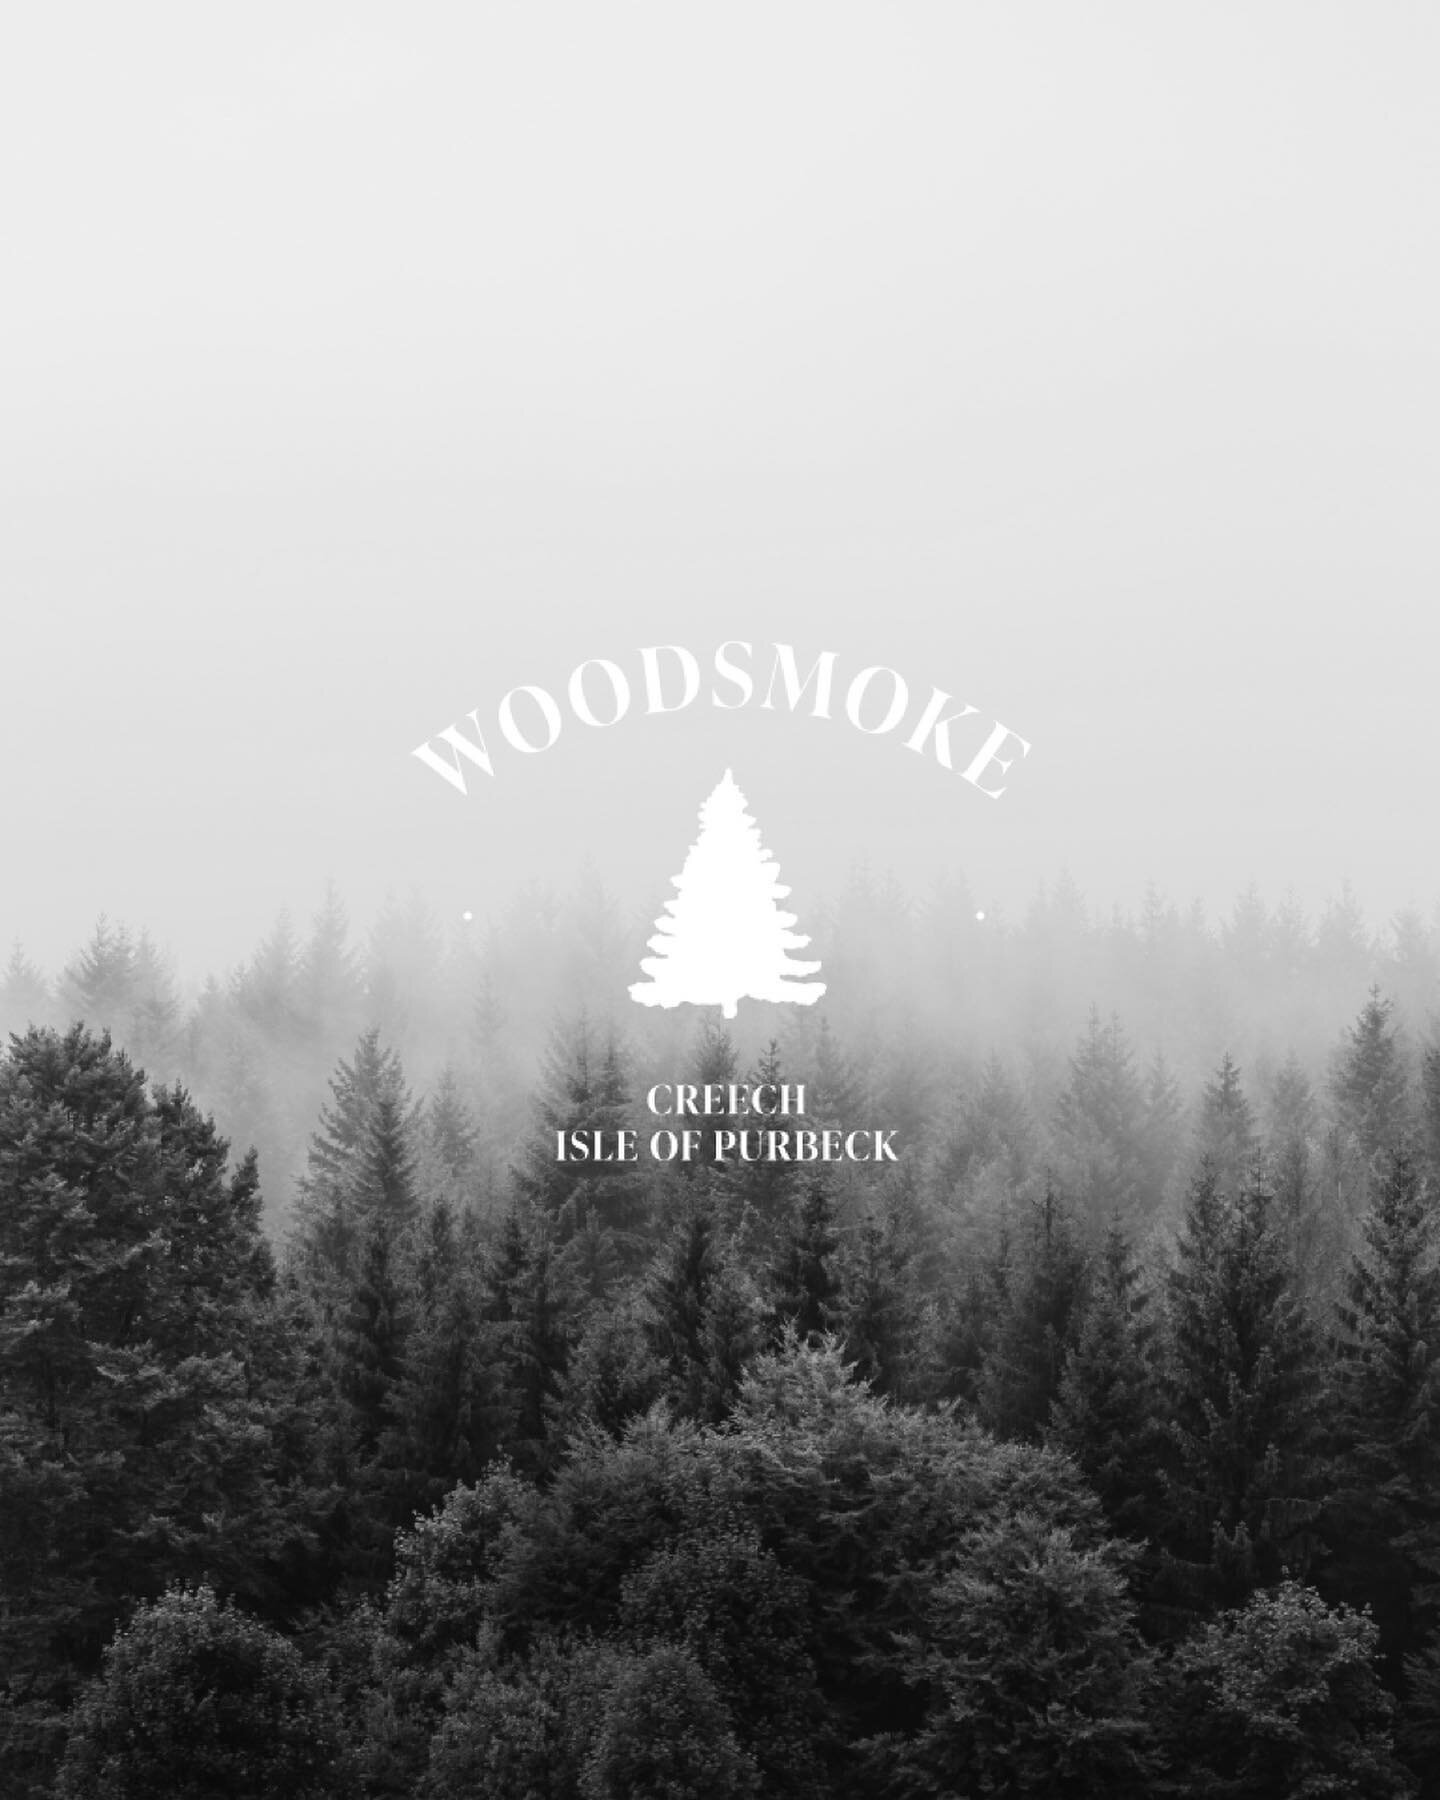 New brand identity for Woodsmoke. &ldquo;Nestled in the woods of the Isle of Purbeck where deer roam and the seasons roll into each other. Here in a converted cedar clad barn we are building a hub of creativity, wellness and a destination.&rdquo;

#d